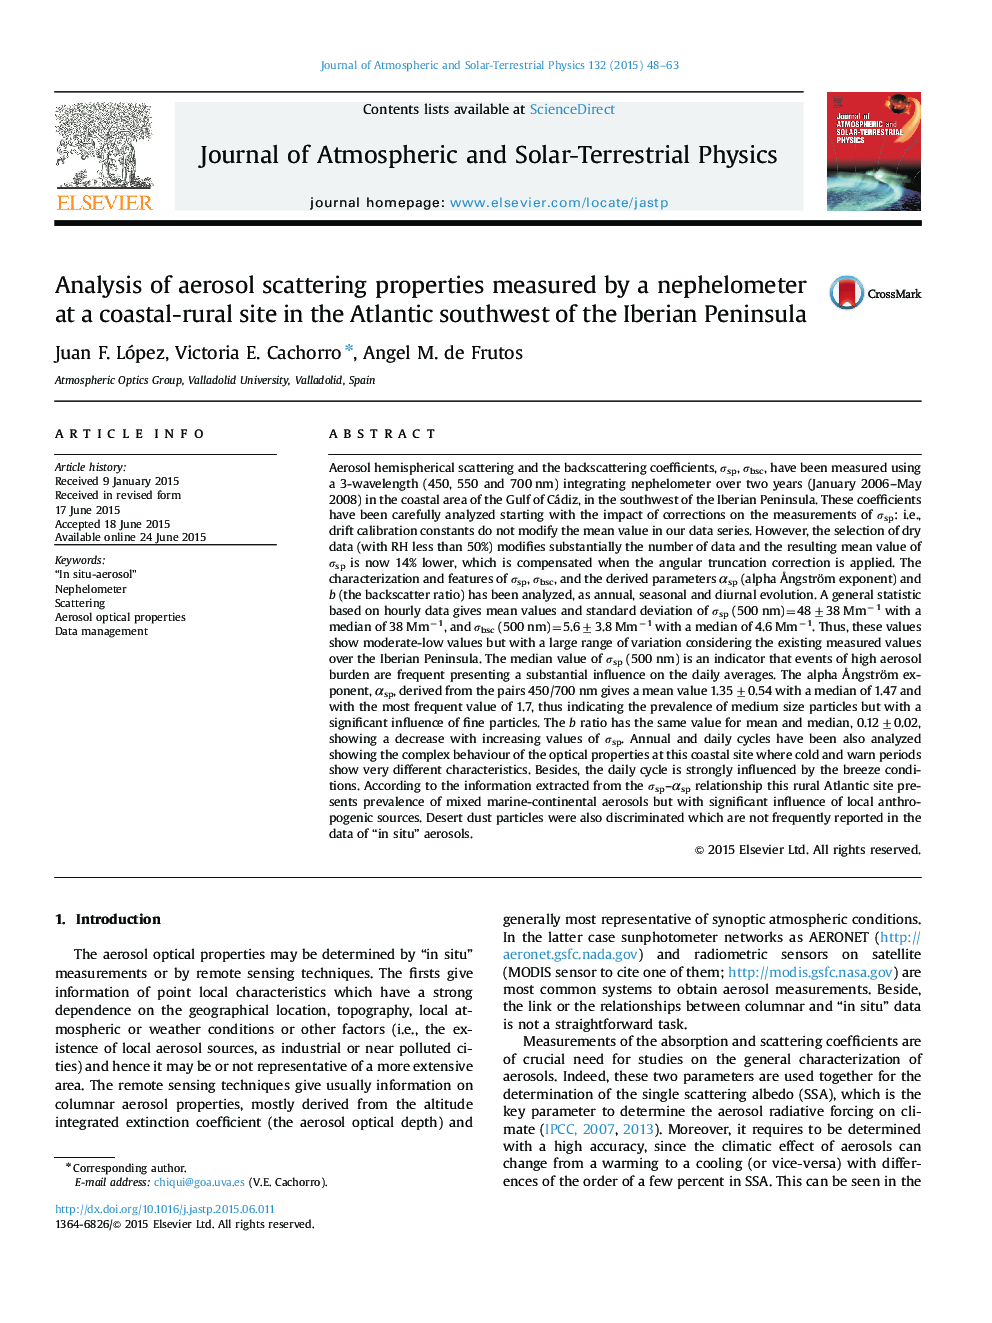 Analysis of aerosol scattering properties measured by a nephelometer at a coastal-rural site in the Atlantic southwest of the Iberian Peninsula